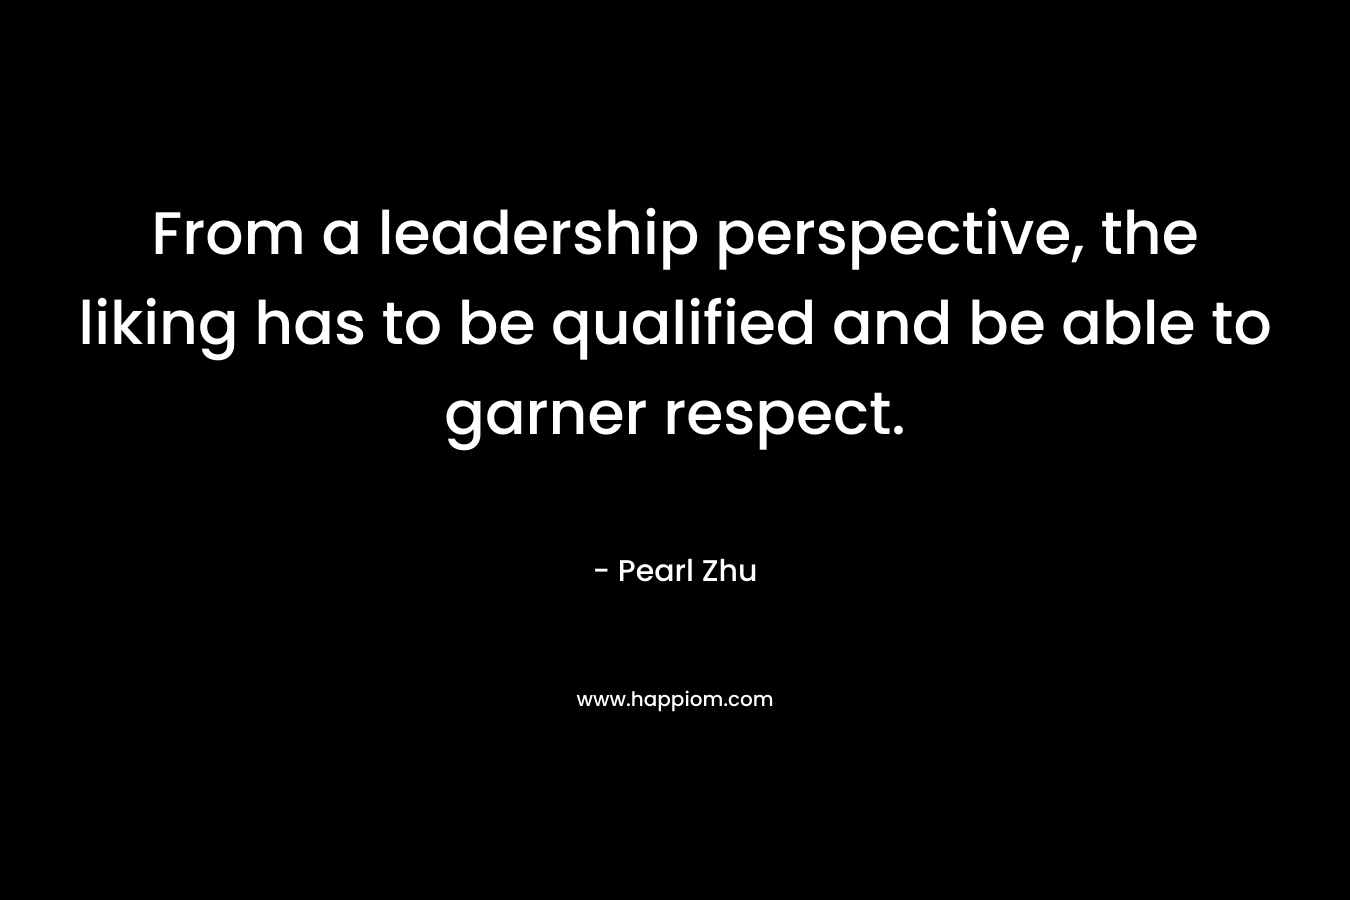 From a leadership perspective, the liking has to be qualified and be able to garner respect.